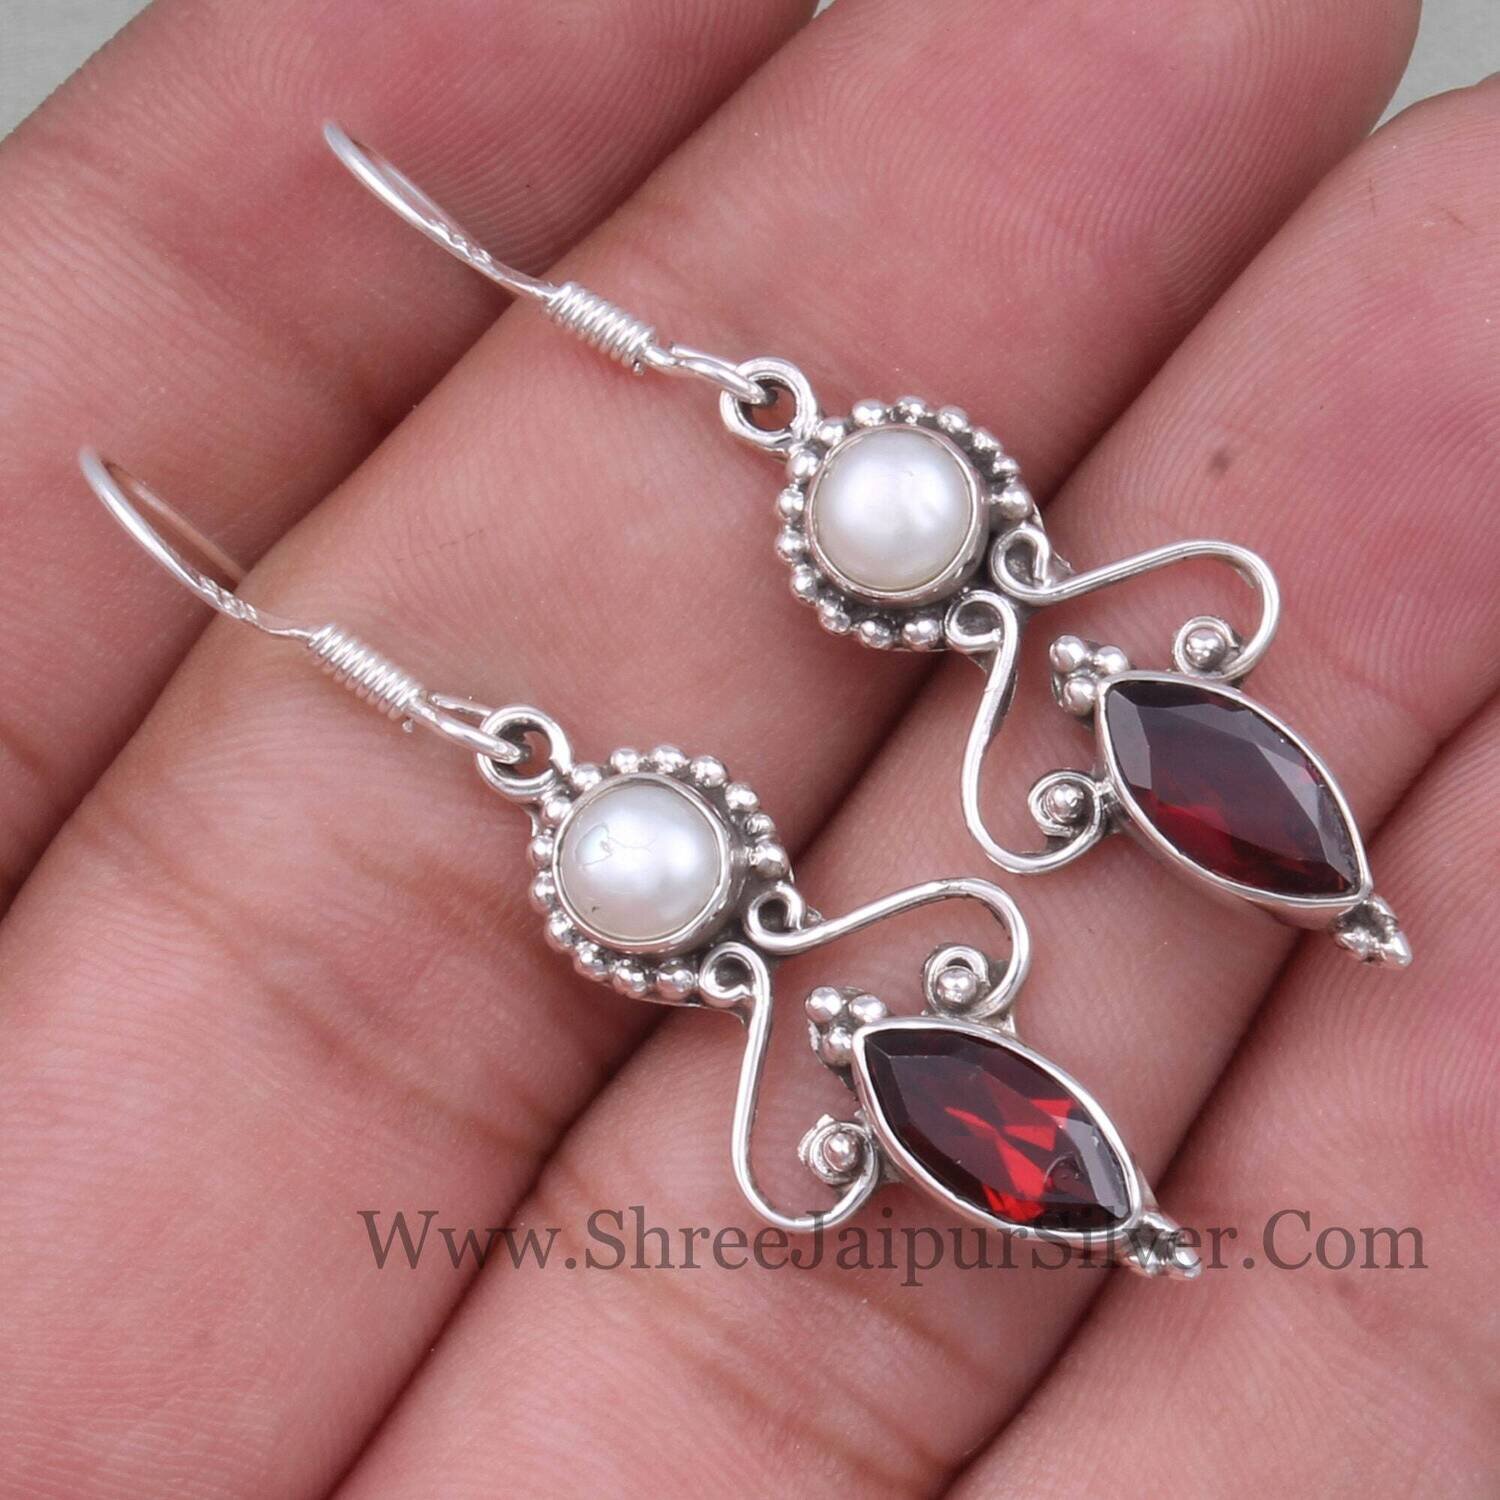 Bridesmaid Natural Red Garnet & Pearl Gemstone Solid 925 Sterling Silver Earrings For Women, Handmade Earrings Gifts For Wedding Anniversary